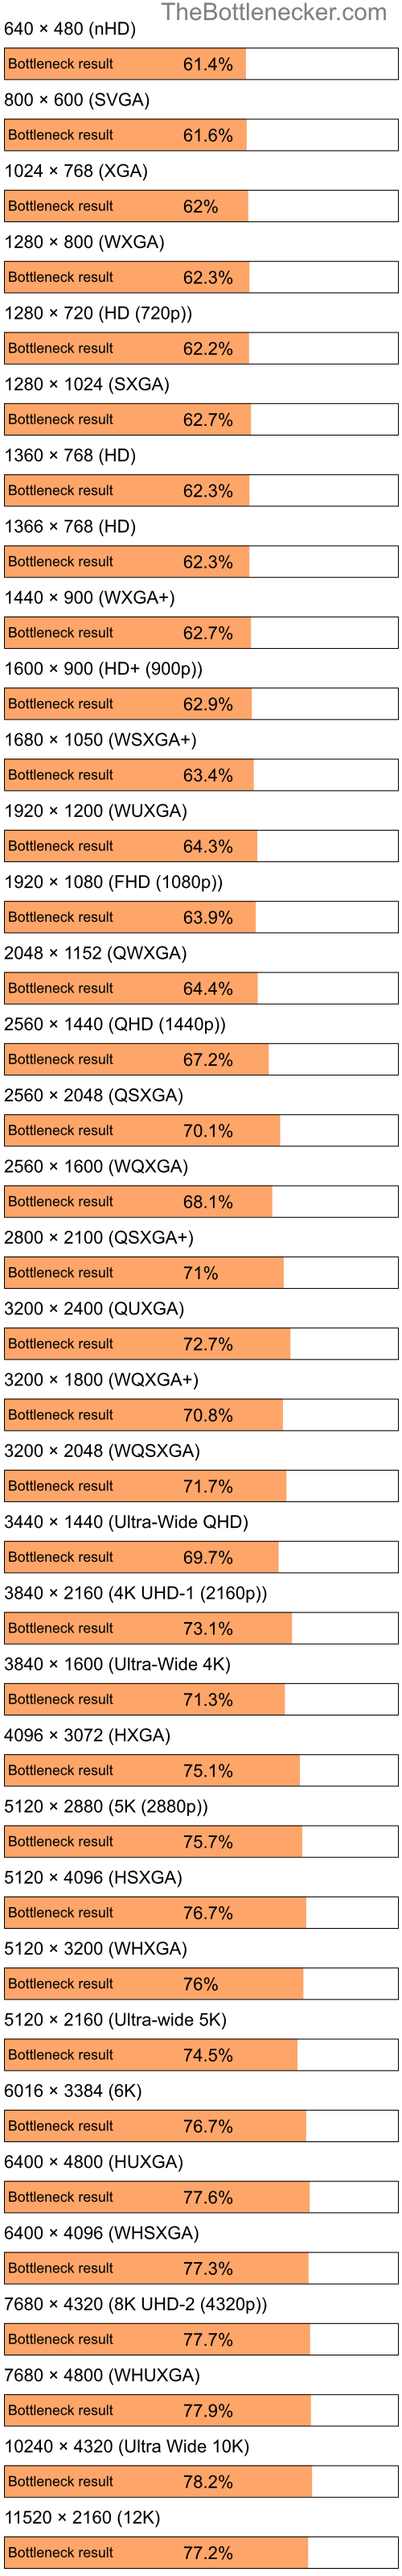 Bottleneck results by resolution for Intel Pentium 4 and AMD Radeon X800 XL in Processor Intense Tasks